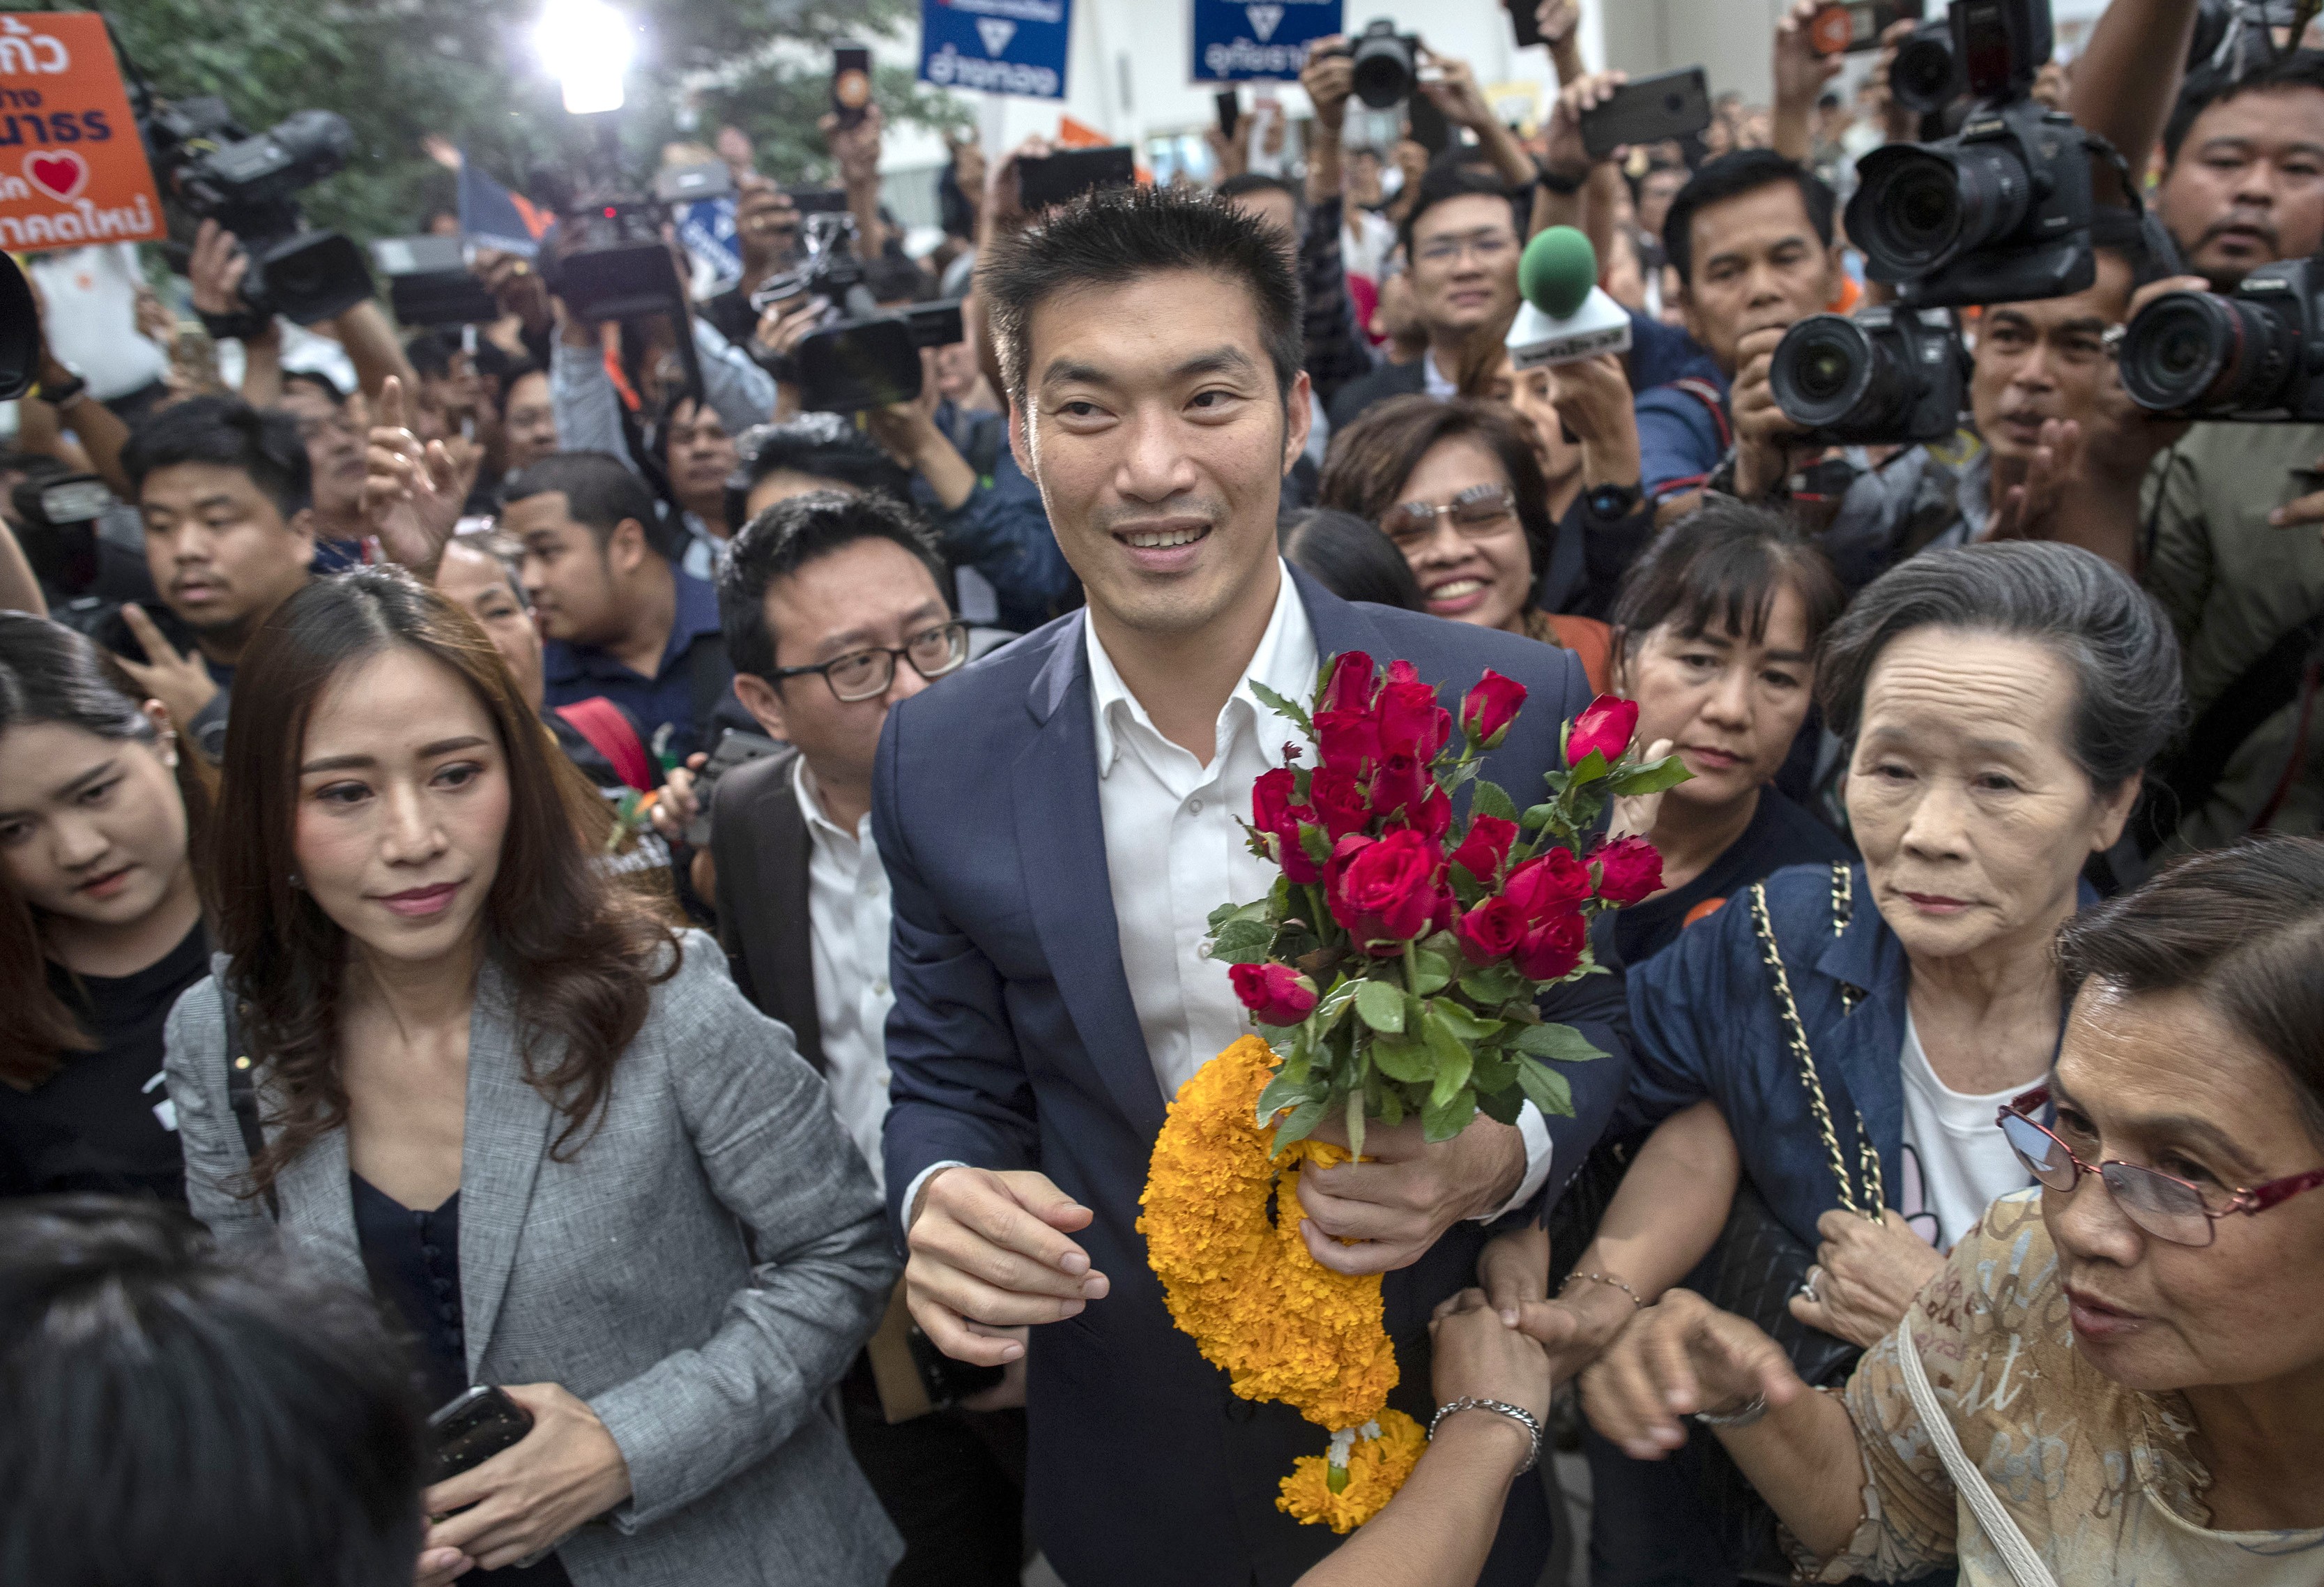 Thai opposition leader Thanathorn Juangroongruangkit calls on supporters to  mobilise in Bangkok on Saturday | South China Morning Post